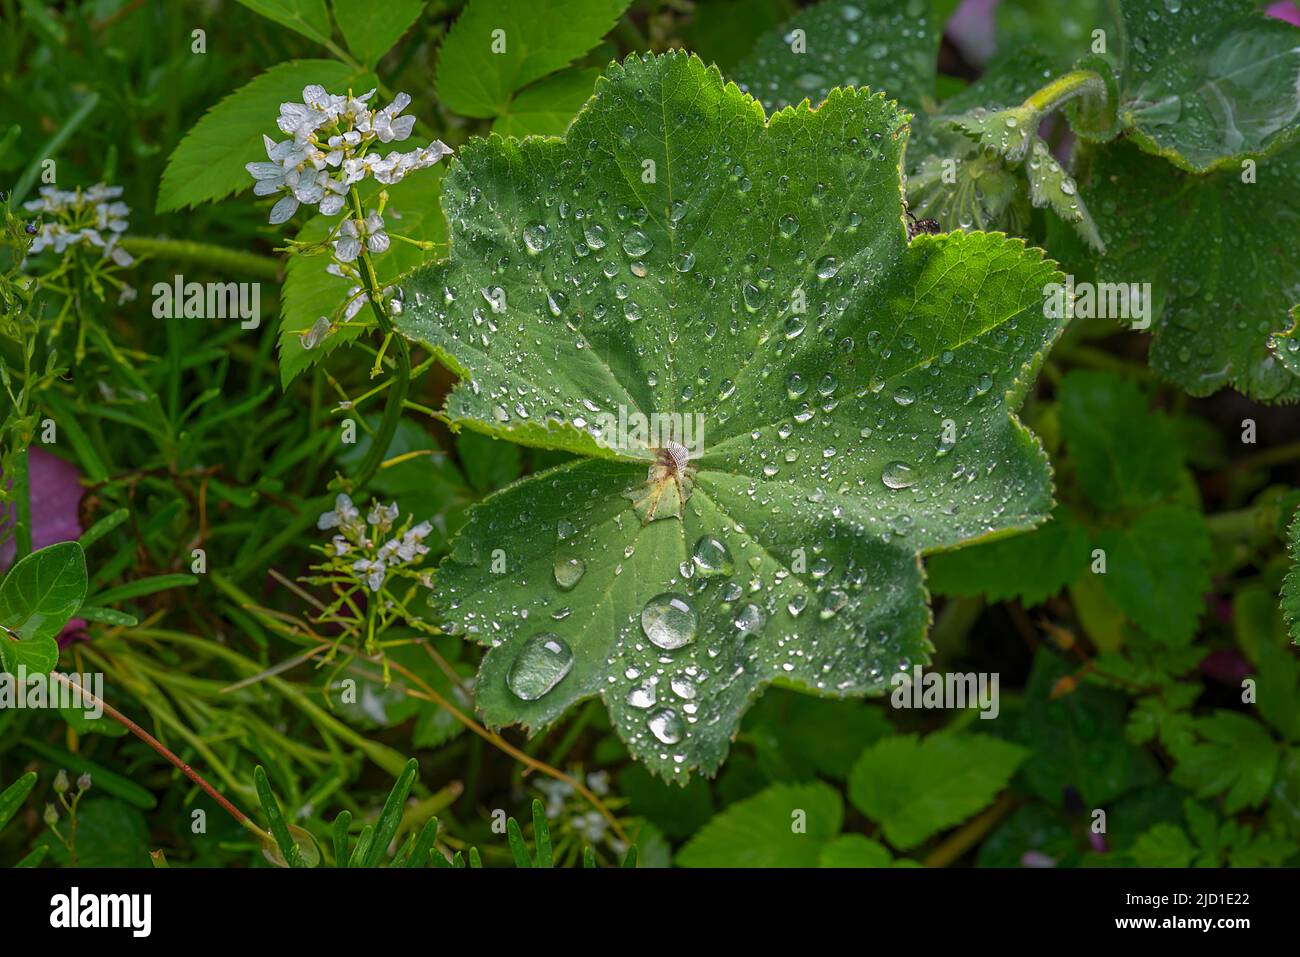 Raindrops on the leaf of common lady's mantle (Alchemilla vulgaris), Bayernm, Germany Stock Photo